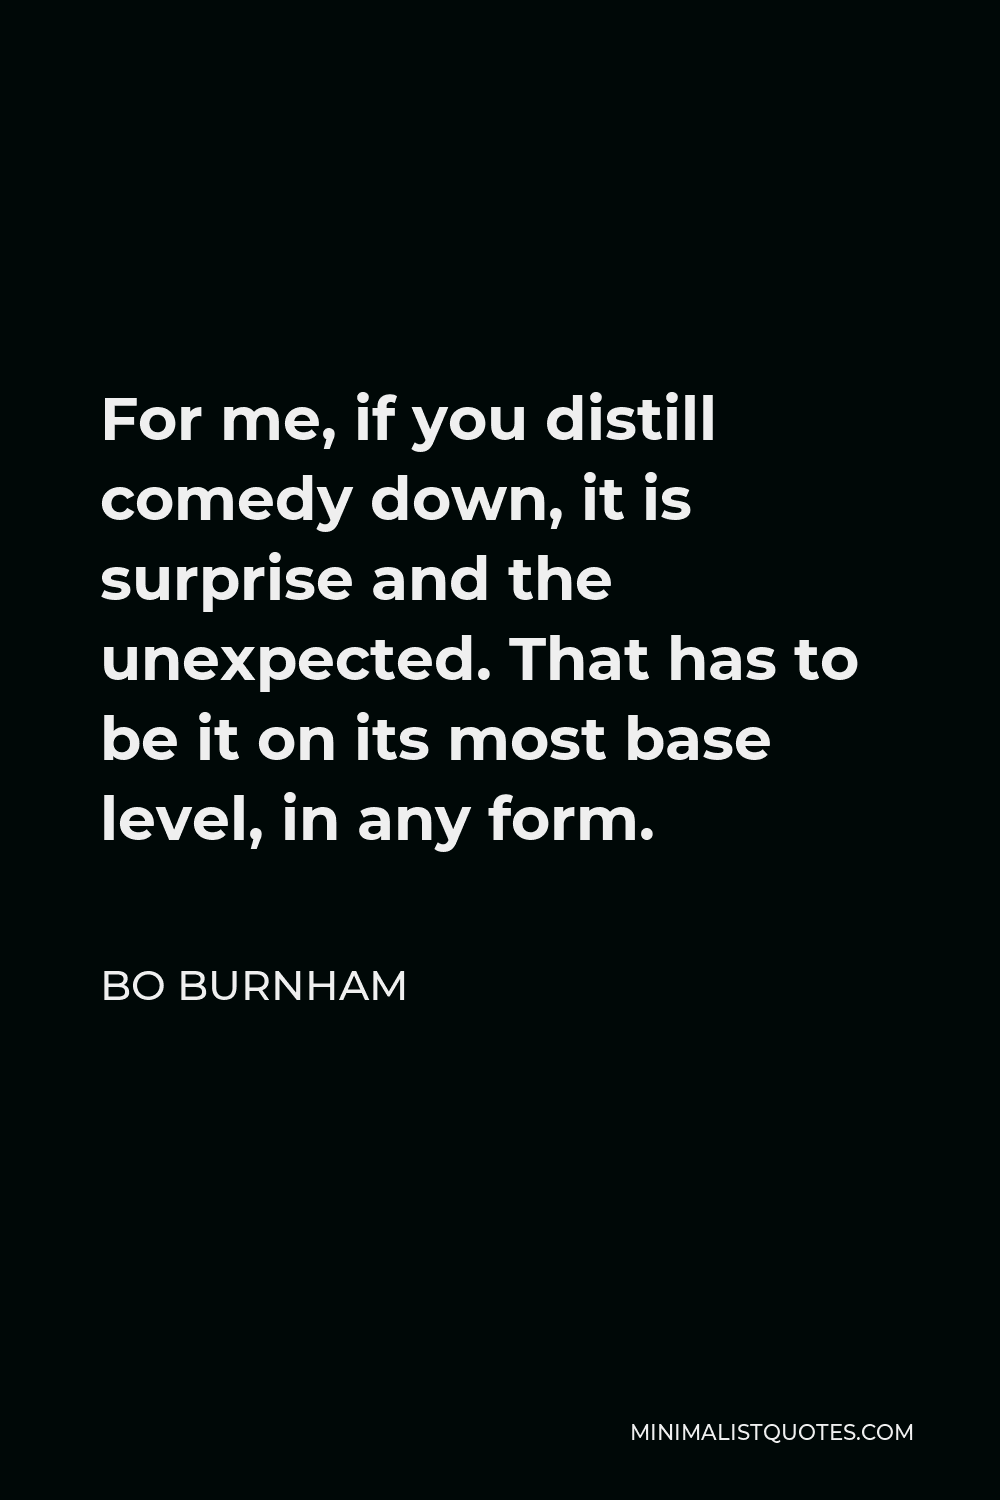 Bo Burnham Quote - For me, if you distill comedy down, it is surprise and the unexpected. That has to be it on its most base level, in any form.